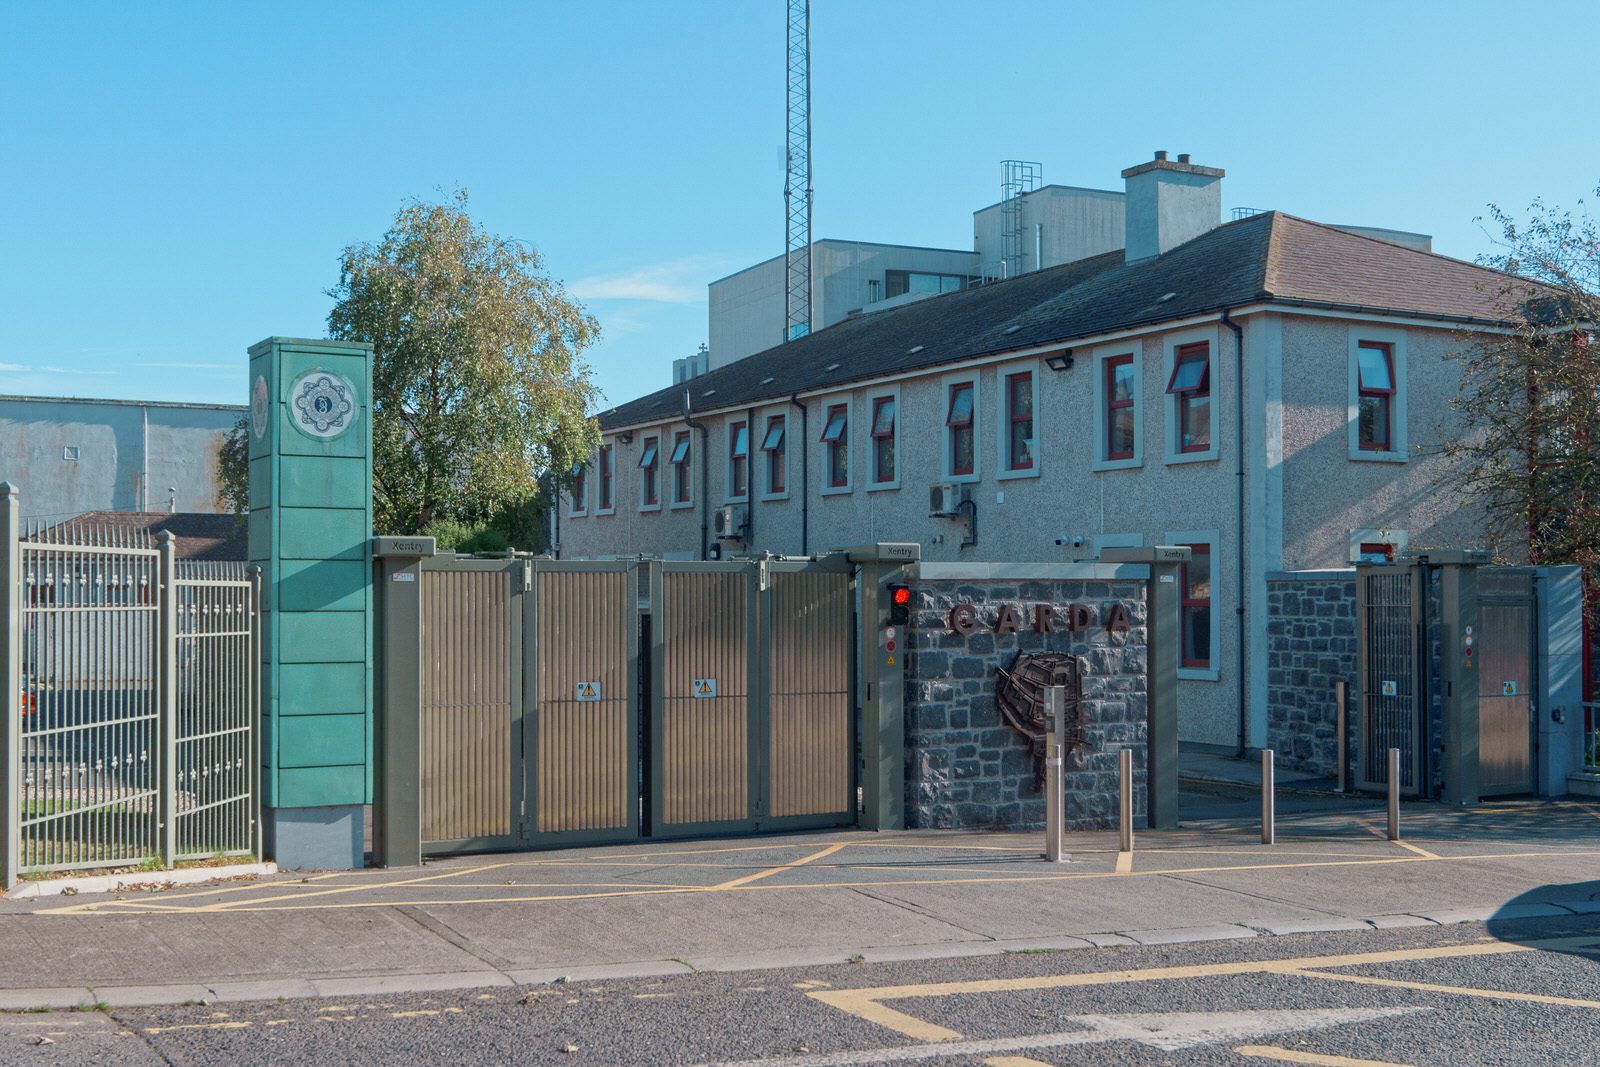 GARDA STATION AND NEW COURTHOUSE [IN CONTEXT WITHIN THE HISTORIC TOWN OF DROGHEDA]-224297-1